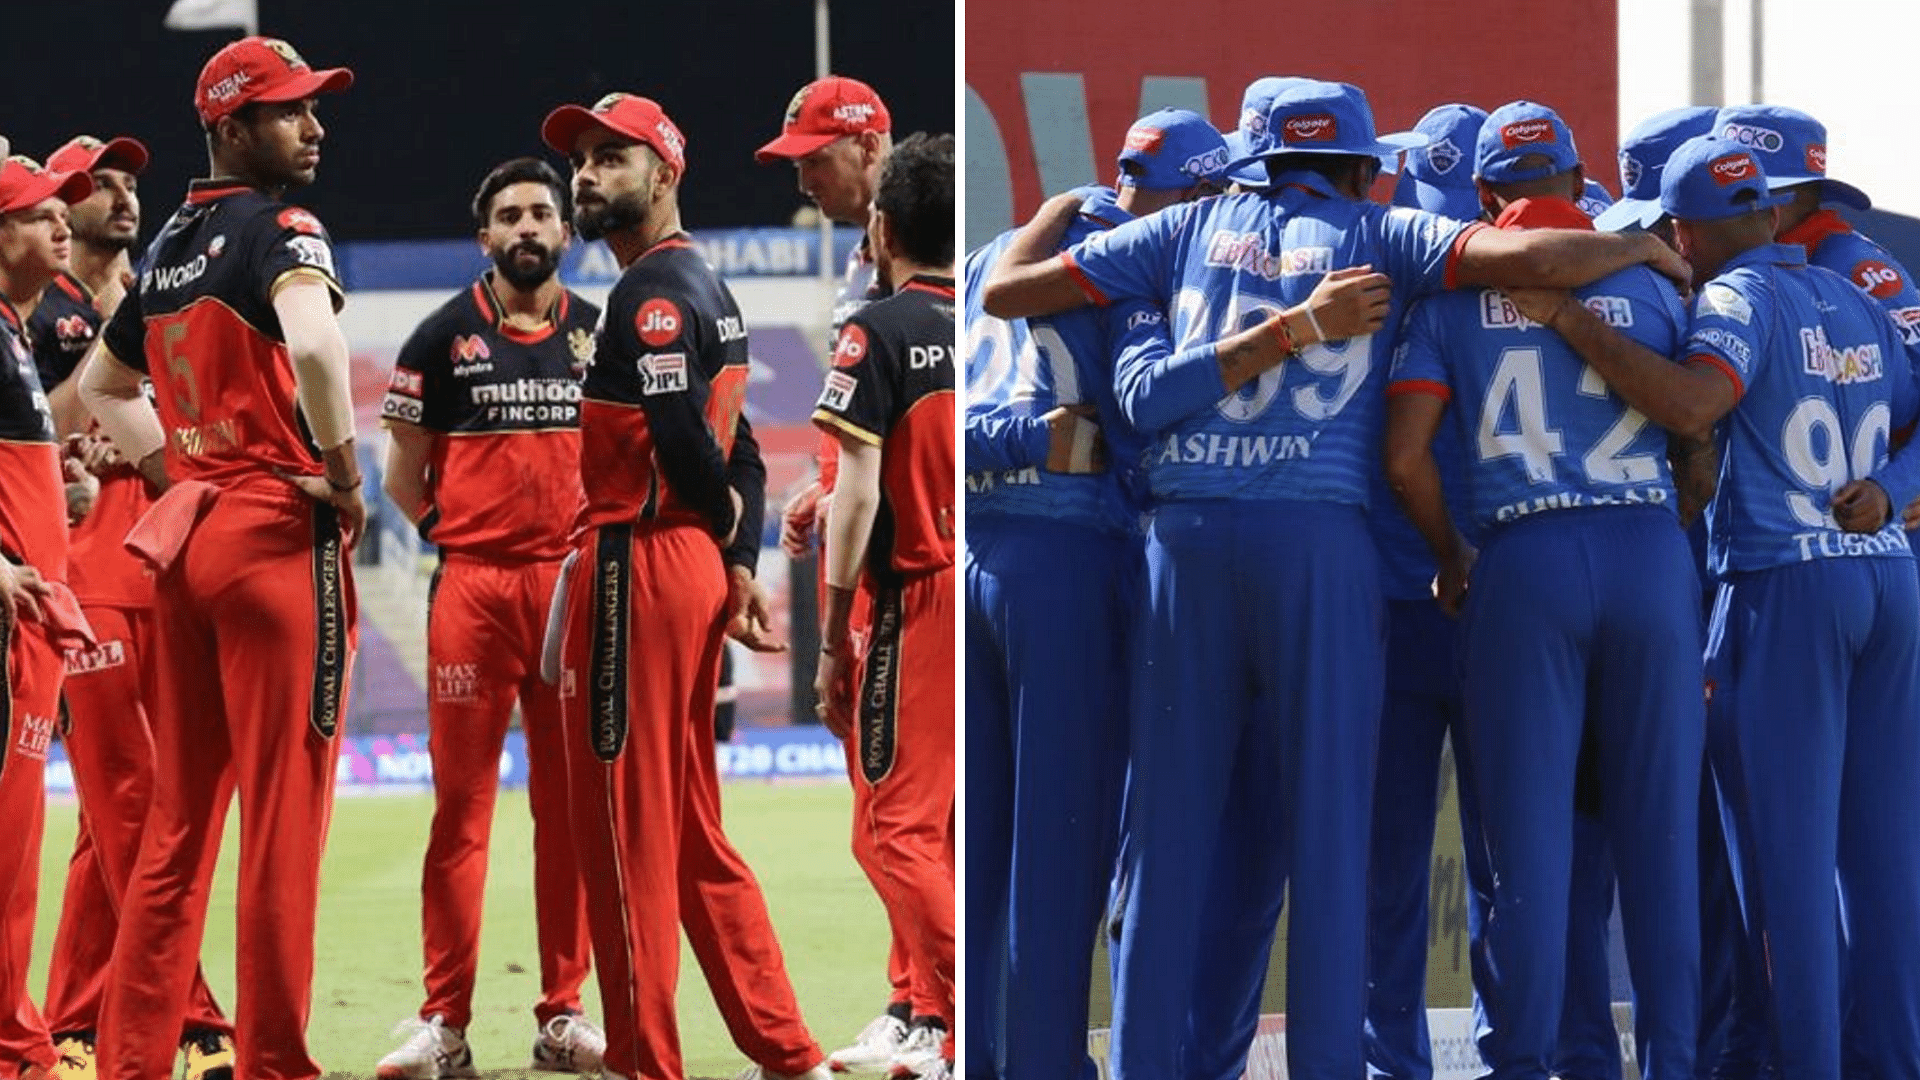 With two and three losses in a row, respectively, both Royal Challengers Bangalore and Delhi Capitals still need to win at least one to game to qualify for the playoffs.